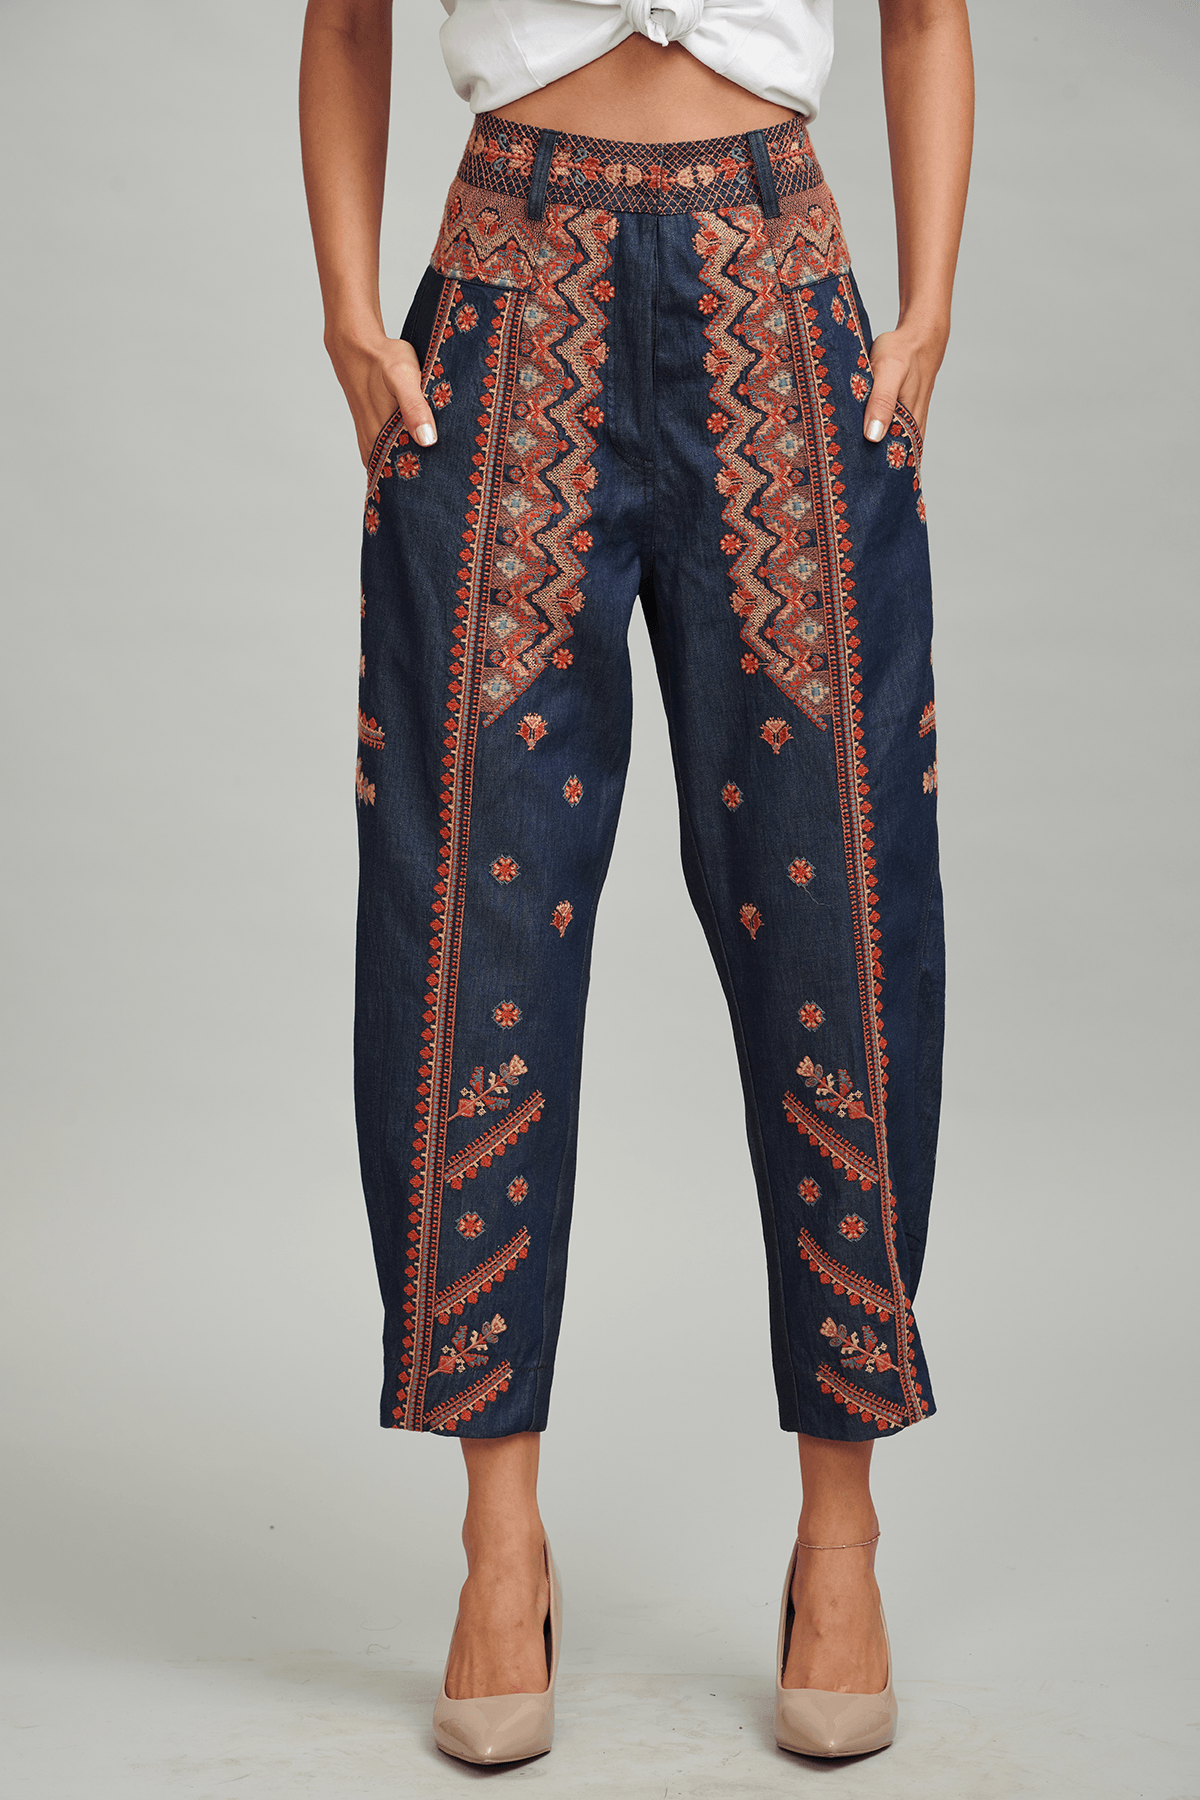 dash and dot - Denim Embroidered Pant Online